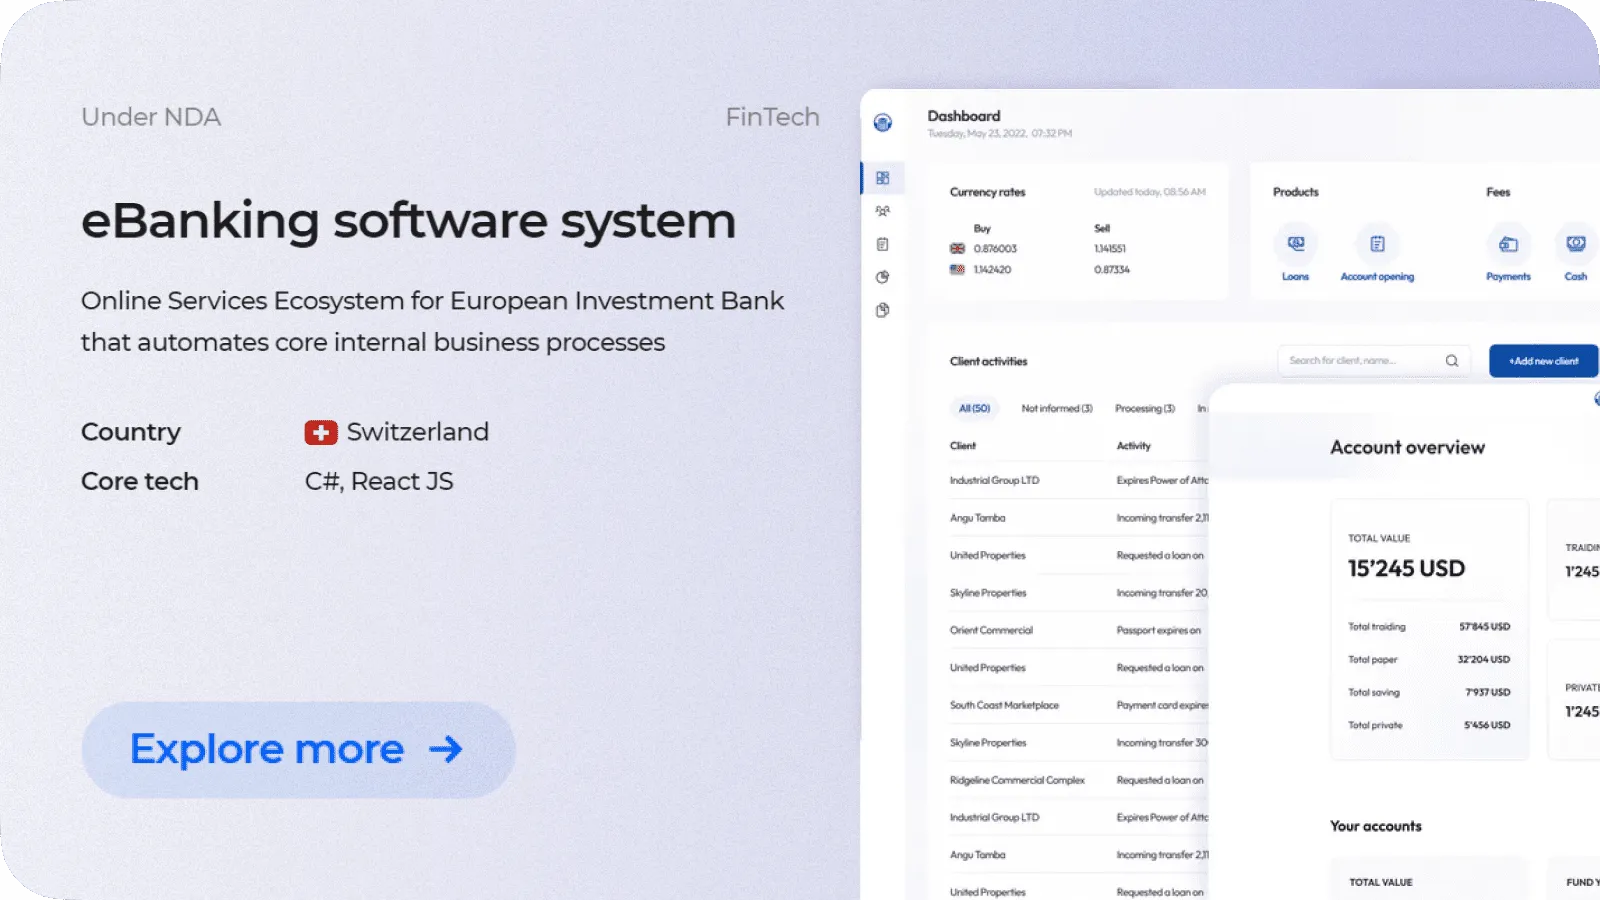 eBanking Software System by Cleveroad